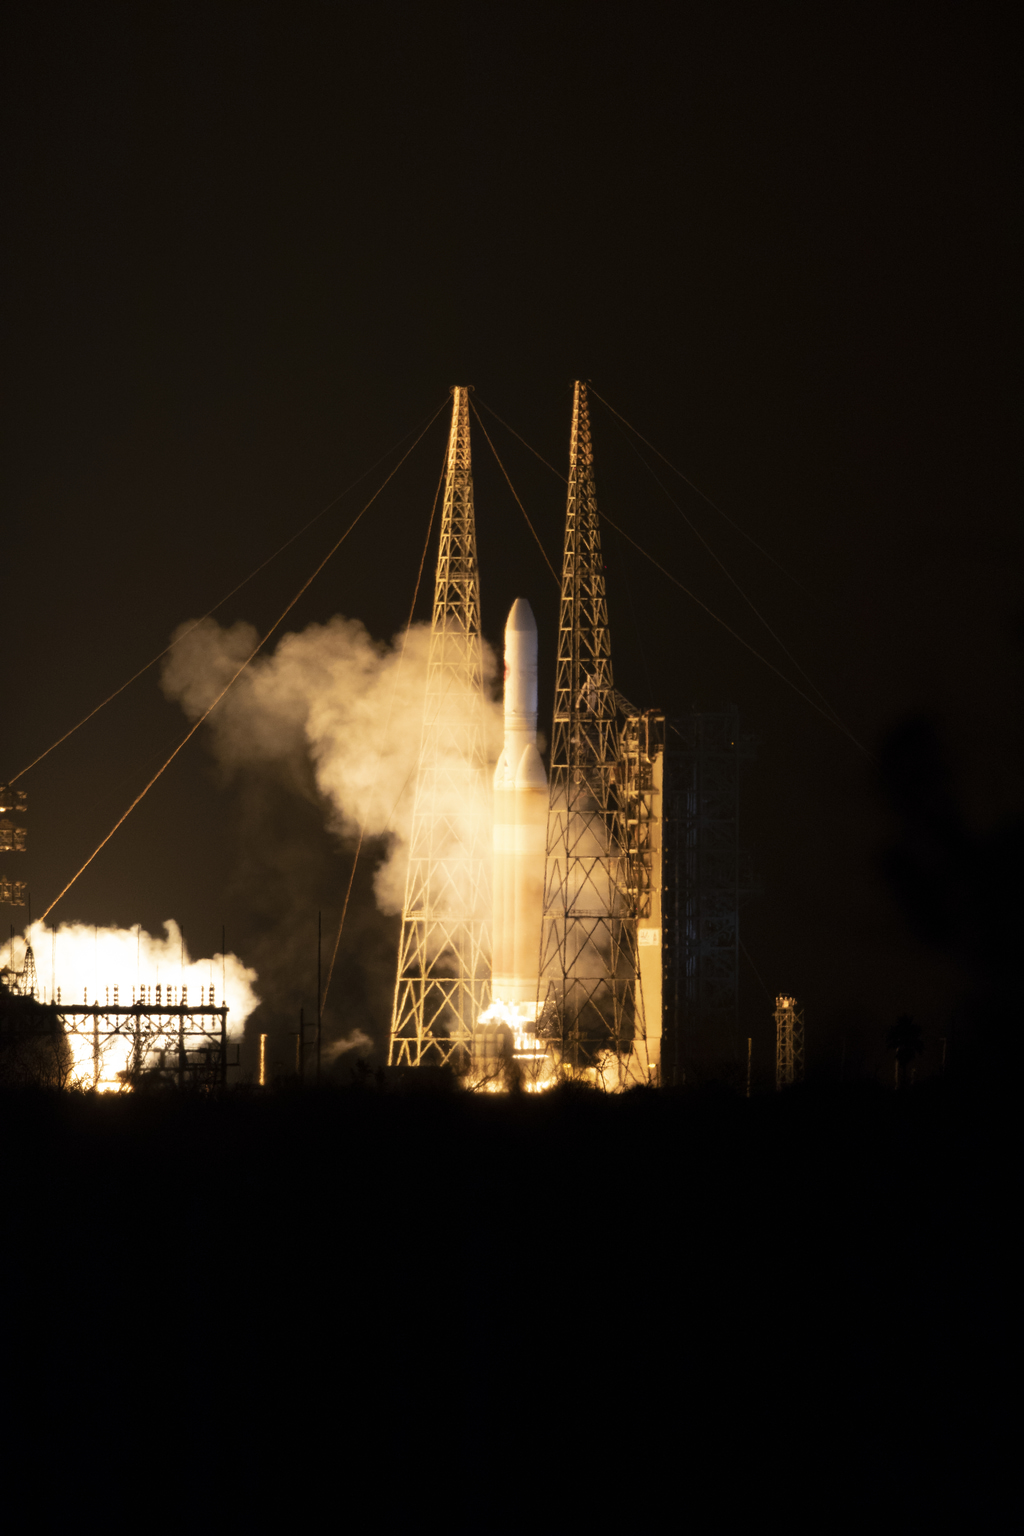 Launch PhotographyAt Cape Canaveral Air Force Station's Space Launch Complex 37, the Delta IV Heavy rocket with NASA's Parker Solar Probe, lifts off at 3:31 a.m. EDT on Sunday, Aug. 12, 2018. The spacecraft was built by Applied Physics Laboratory of Johns Hopkins University in Laurel, Maryland. The mission will perform the closest-ever observations of a star when it travels through the Sun's atmosphere, called the corona. The probe will rely on measurements and imaging to revolutionize our understanding of the corona and the Sun-Earth connection.Credit: NASA/Kim ShiflettMore photos can be found on NASA's Flickr.